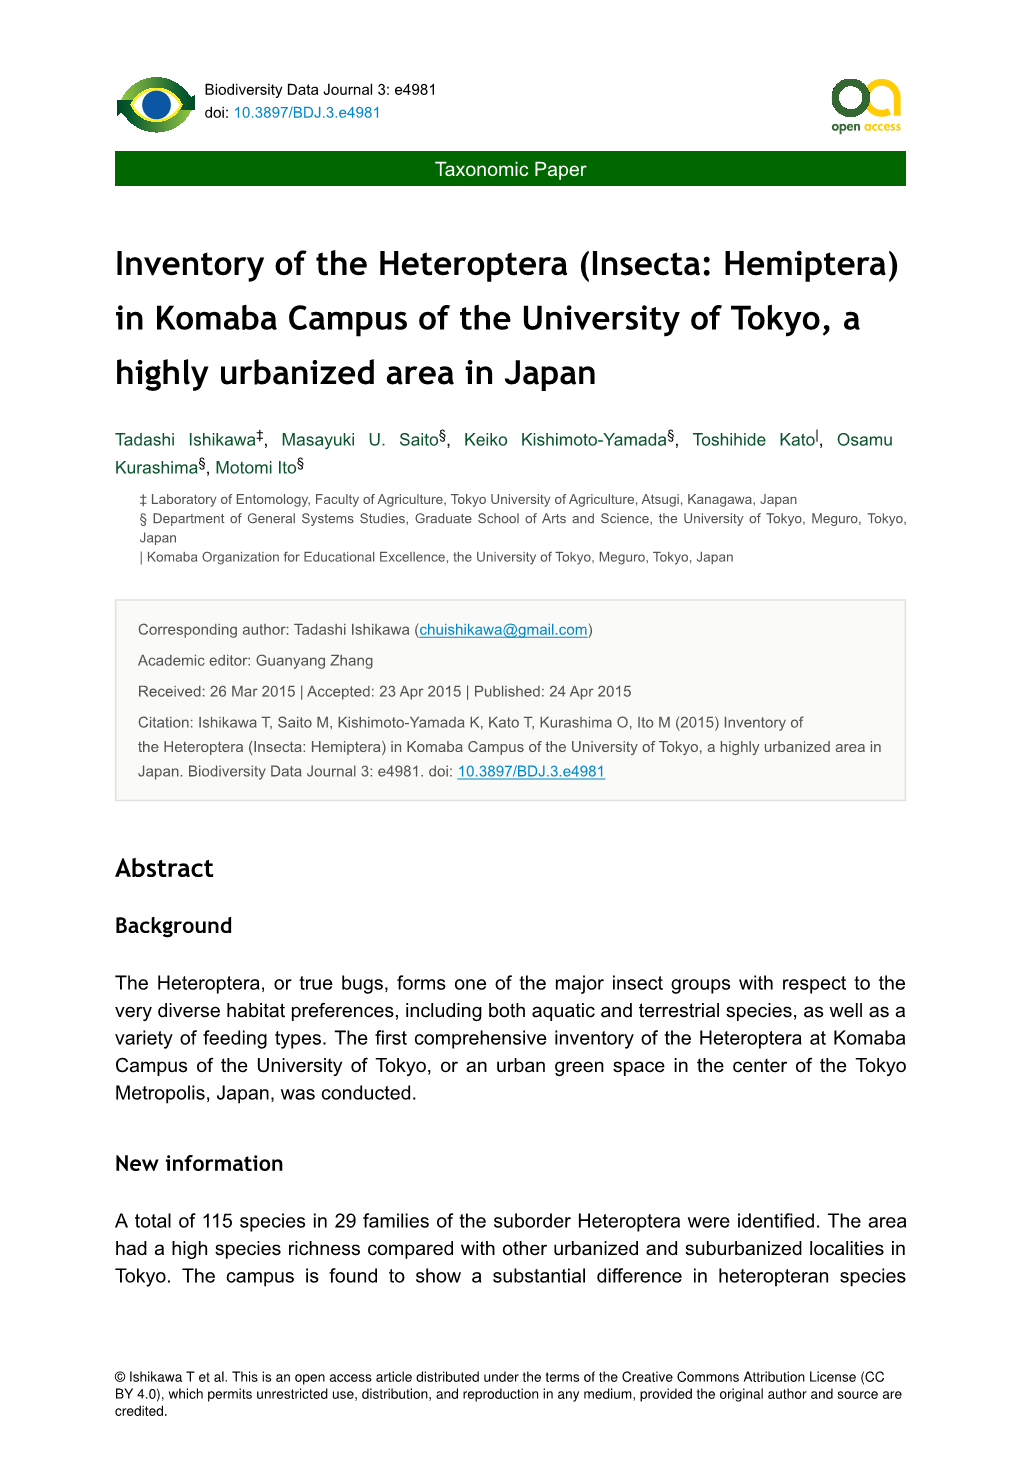 Inventory of the Heteroptera (Insecta: Hemiptera) in Komaba Campus of the University of Tokyo, a Highly Urbanized Area in Japan